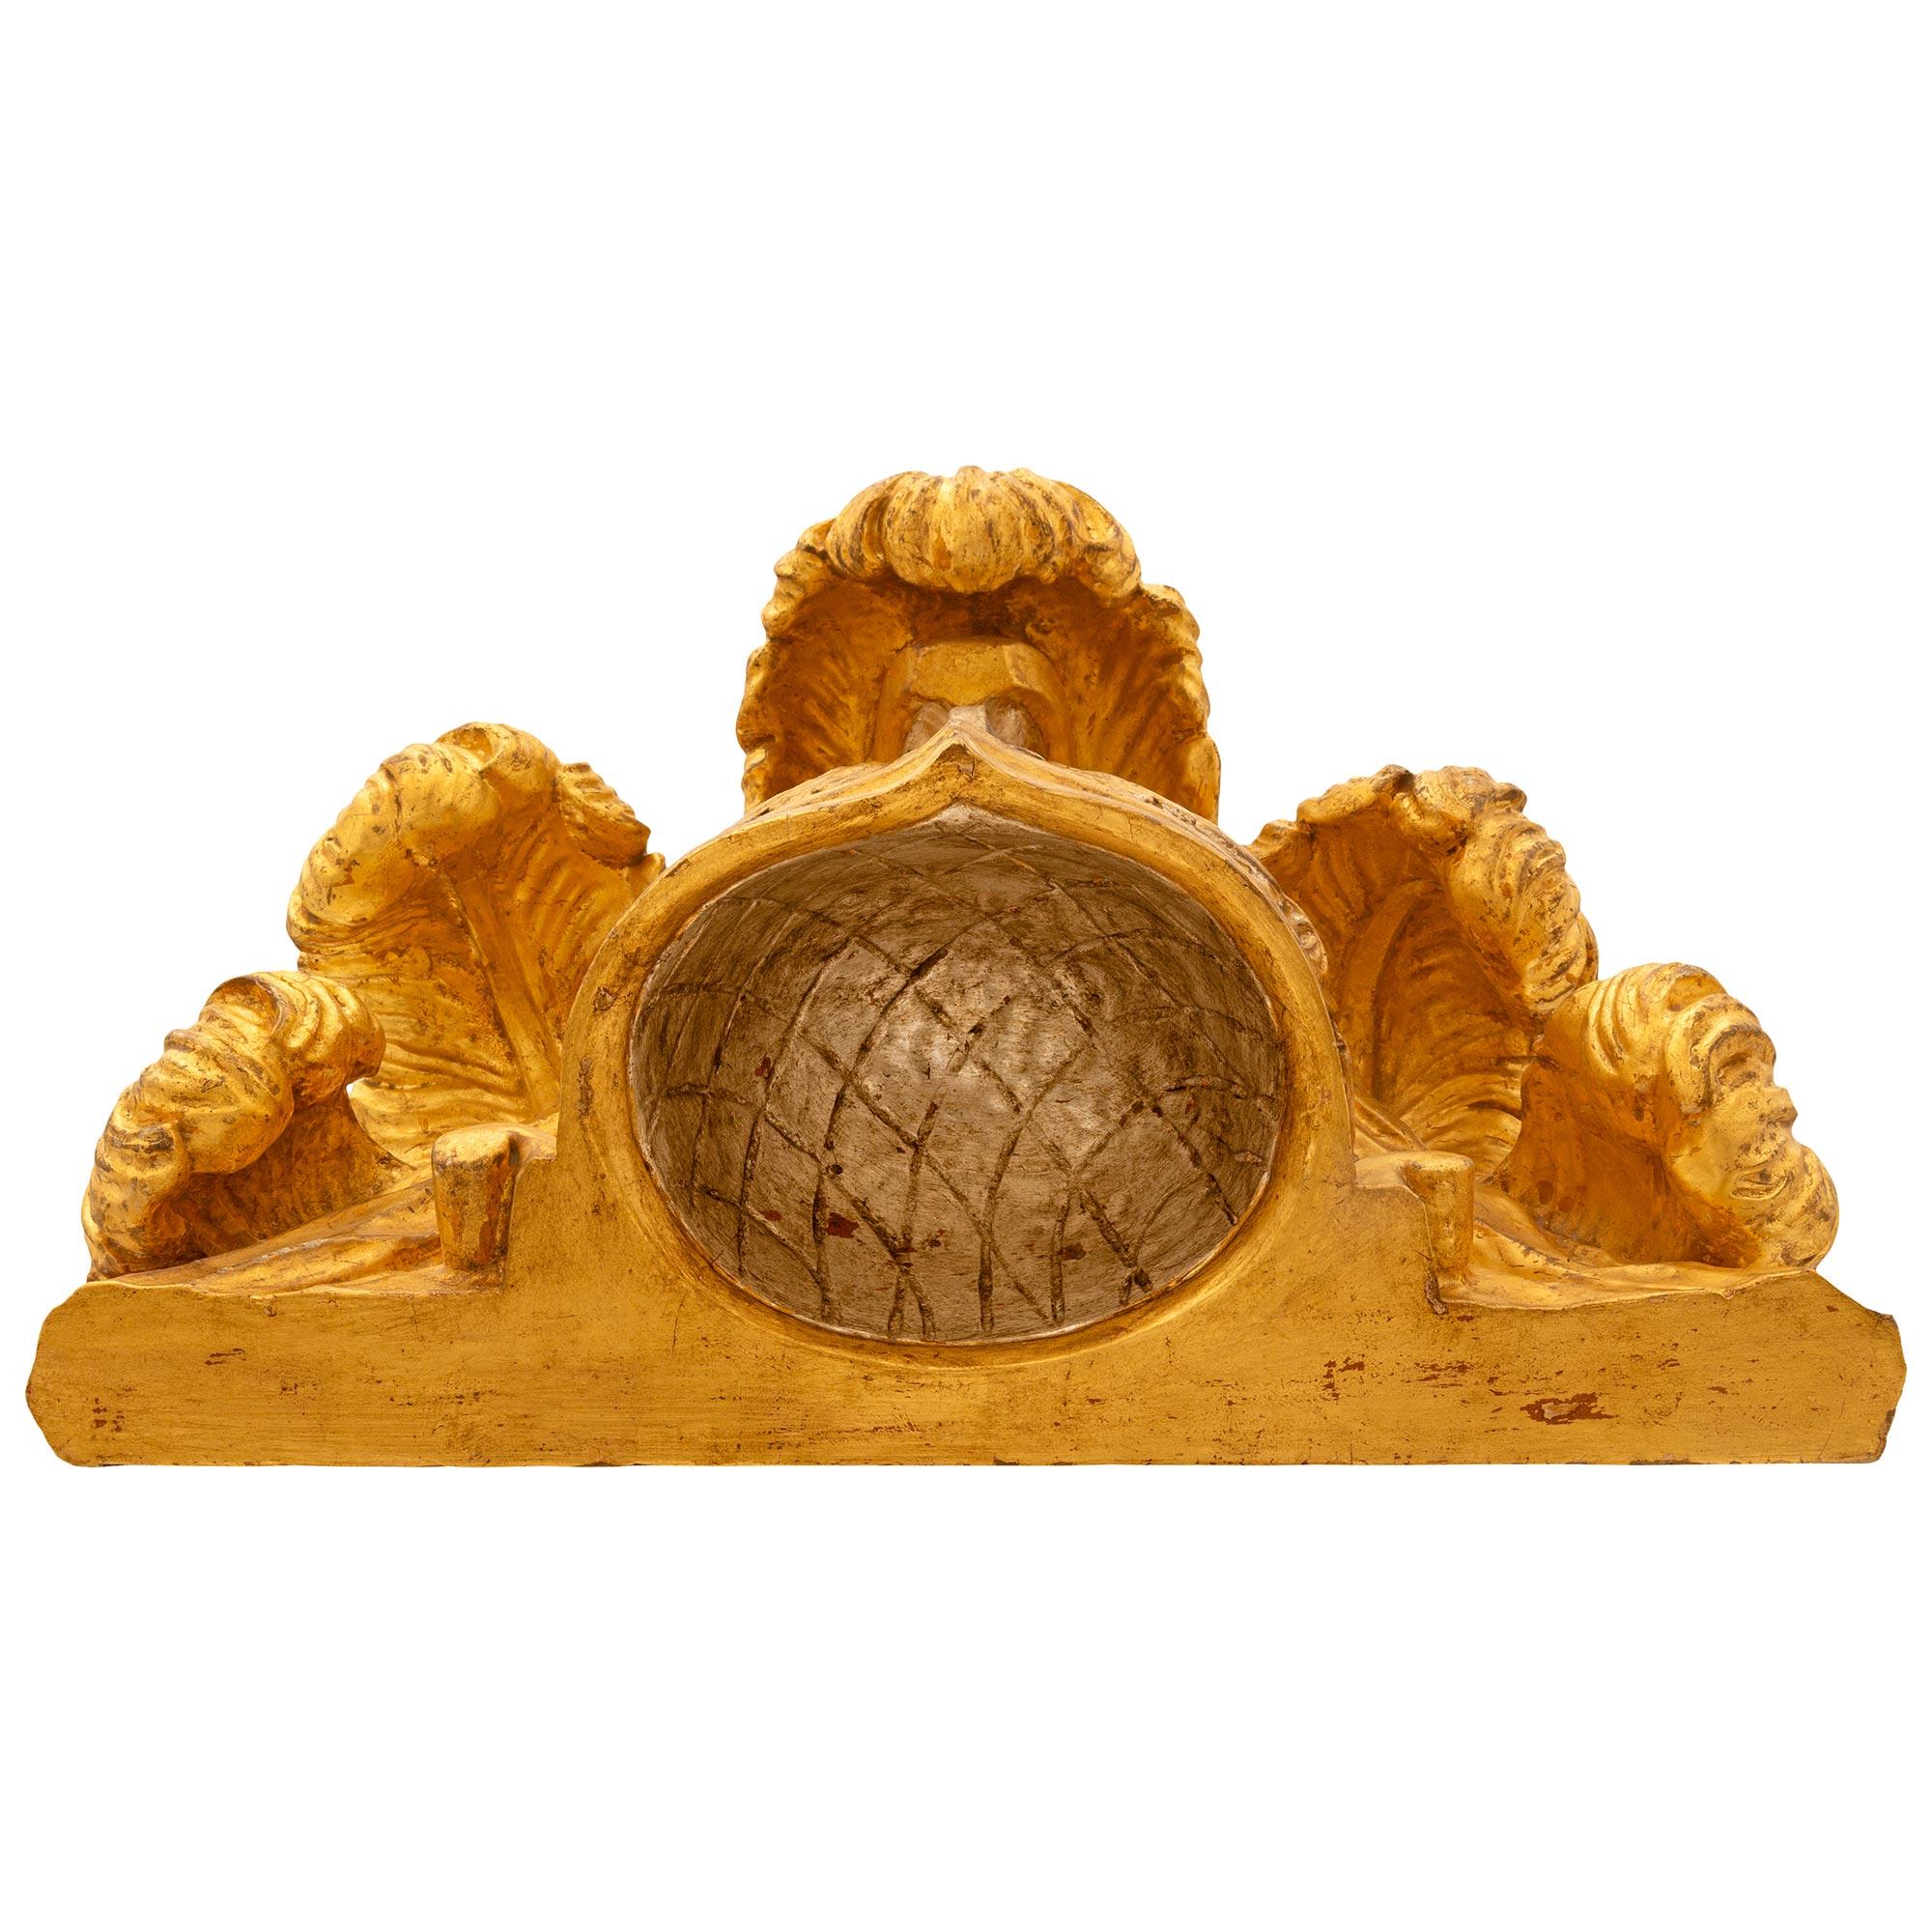 A beautiful and very unique Italian early 19th century Mecca and Giltwood Centurion helmet wall decor. This impressive wall mounted helmet displays a richly carved Giltwood front brim below the Mecca body showcasing striking Giltwood Rocaille